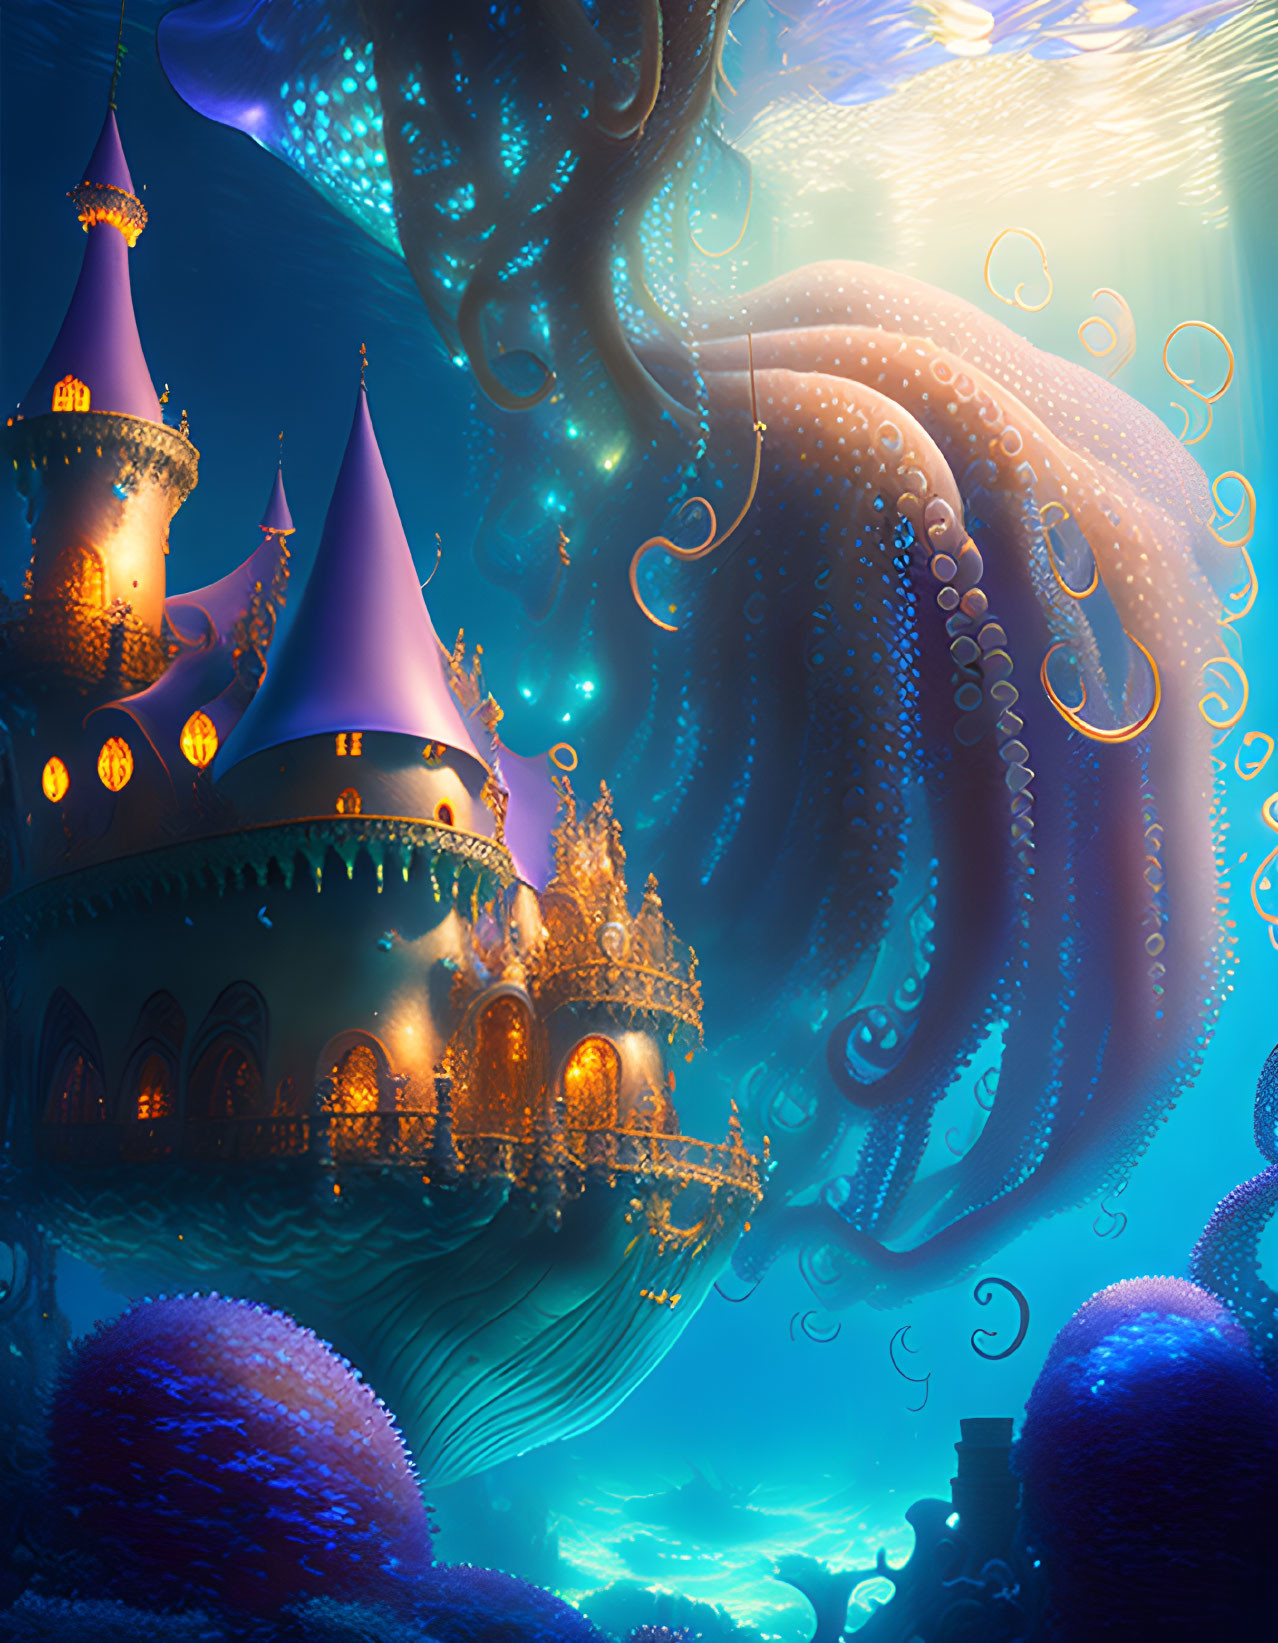 Undersea castle with glowing windows, jellyfish, and colossal octopus in blue depths